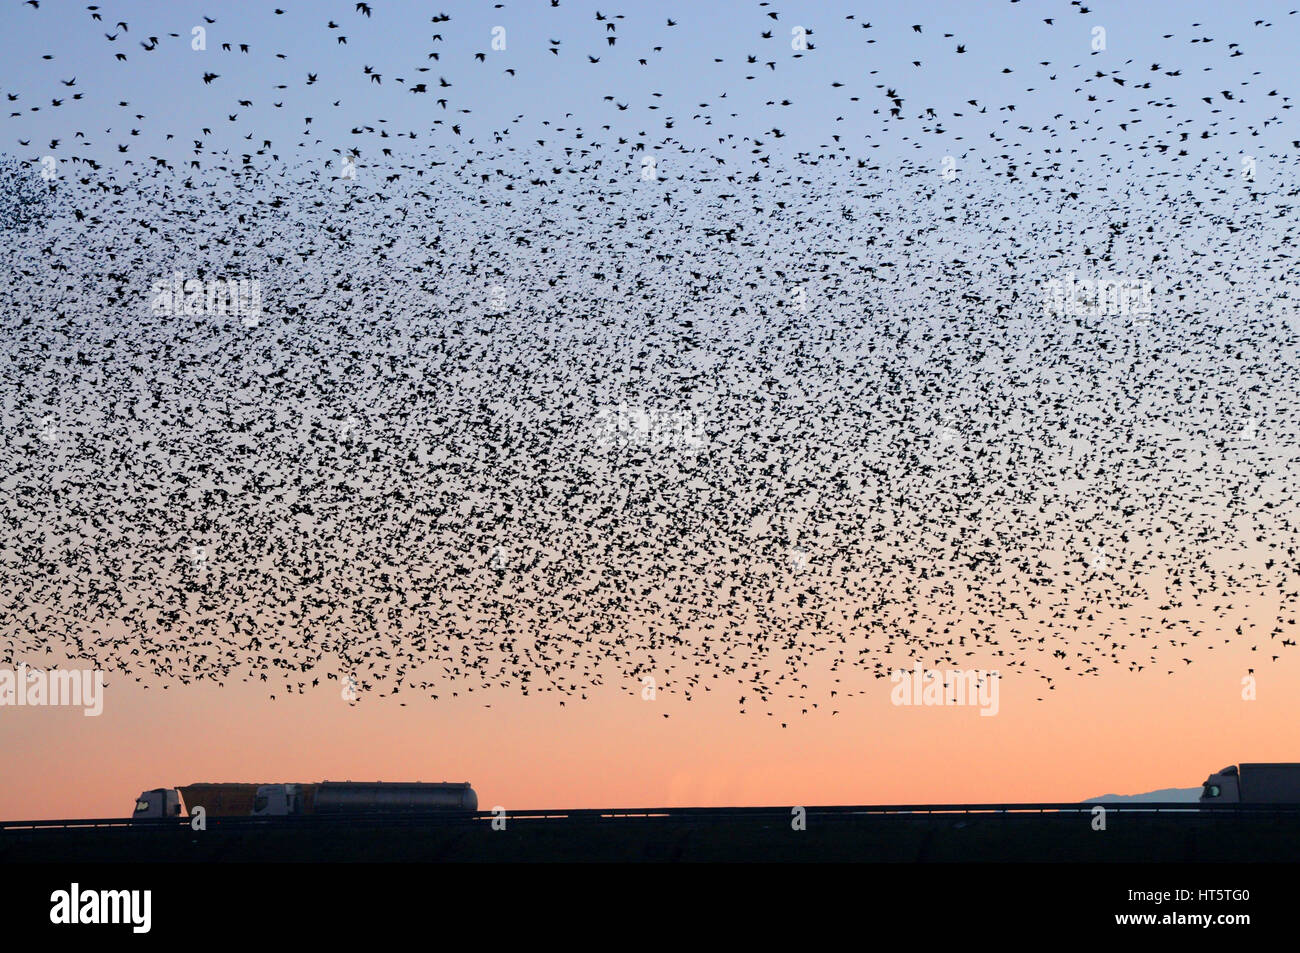 Migration of a large flock of birds on the highway Stock Photo